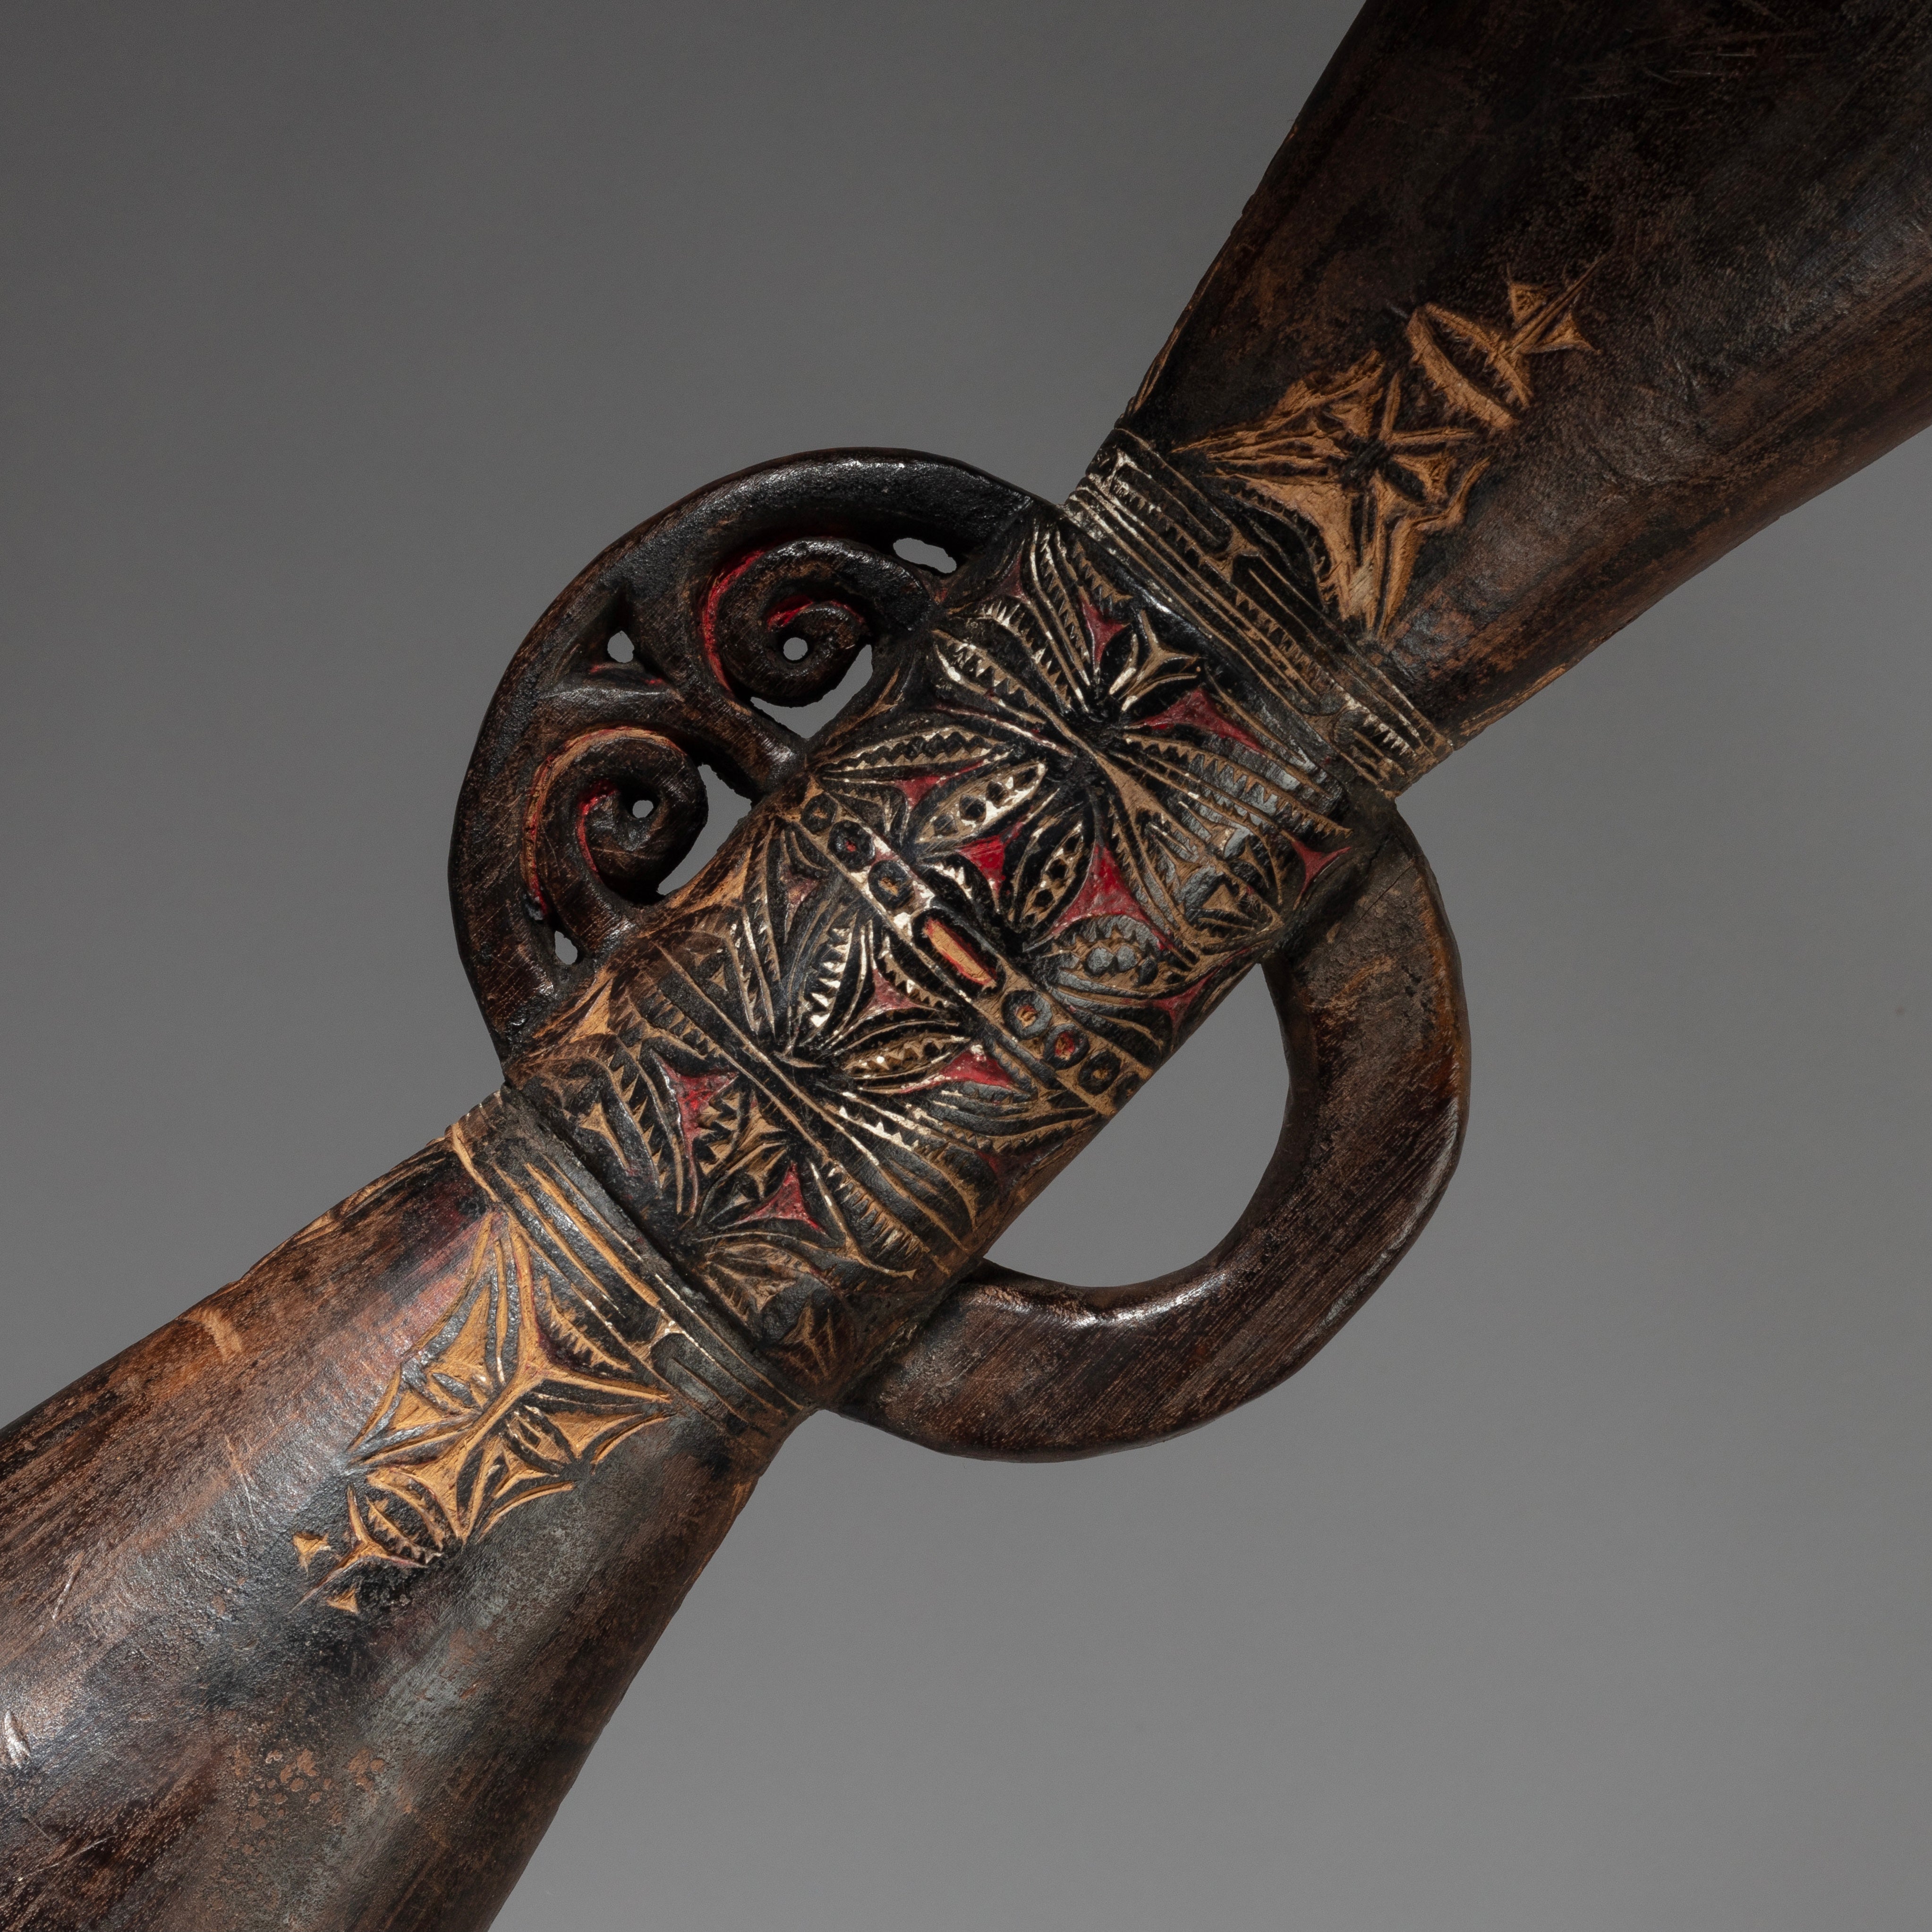 AN OLD ENGRAVED WOODEN DRUM FROM PAPUA NEW GUINEA EX UK COLL.( No 1480 )